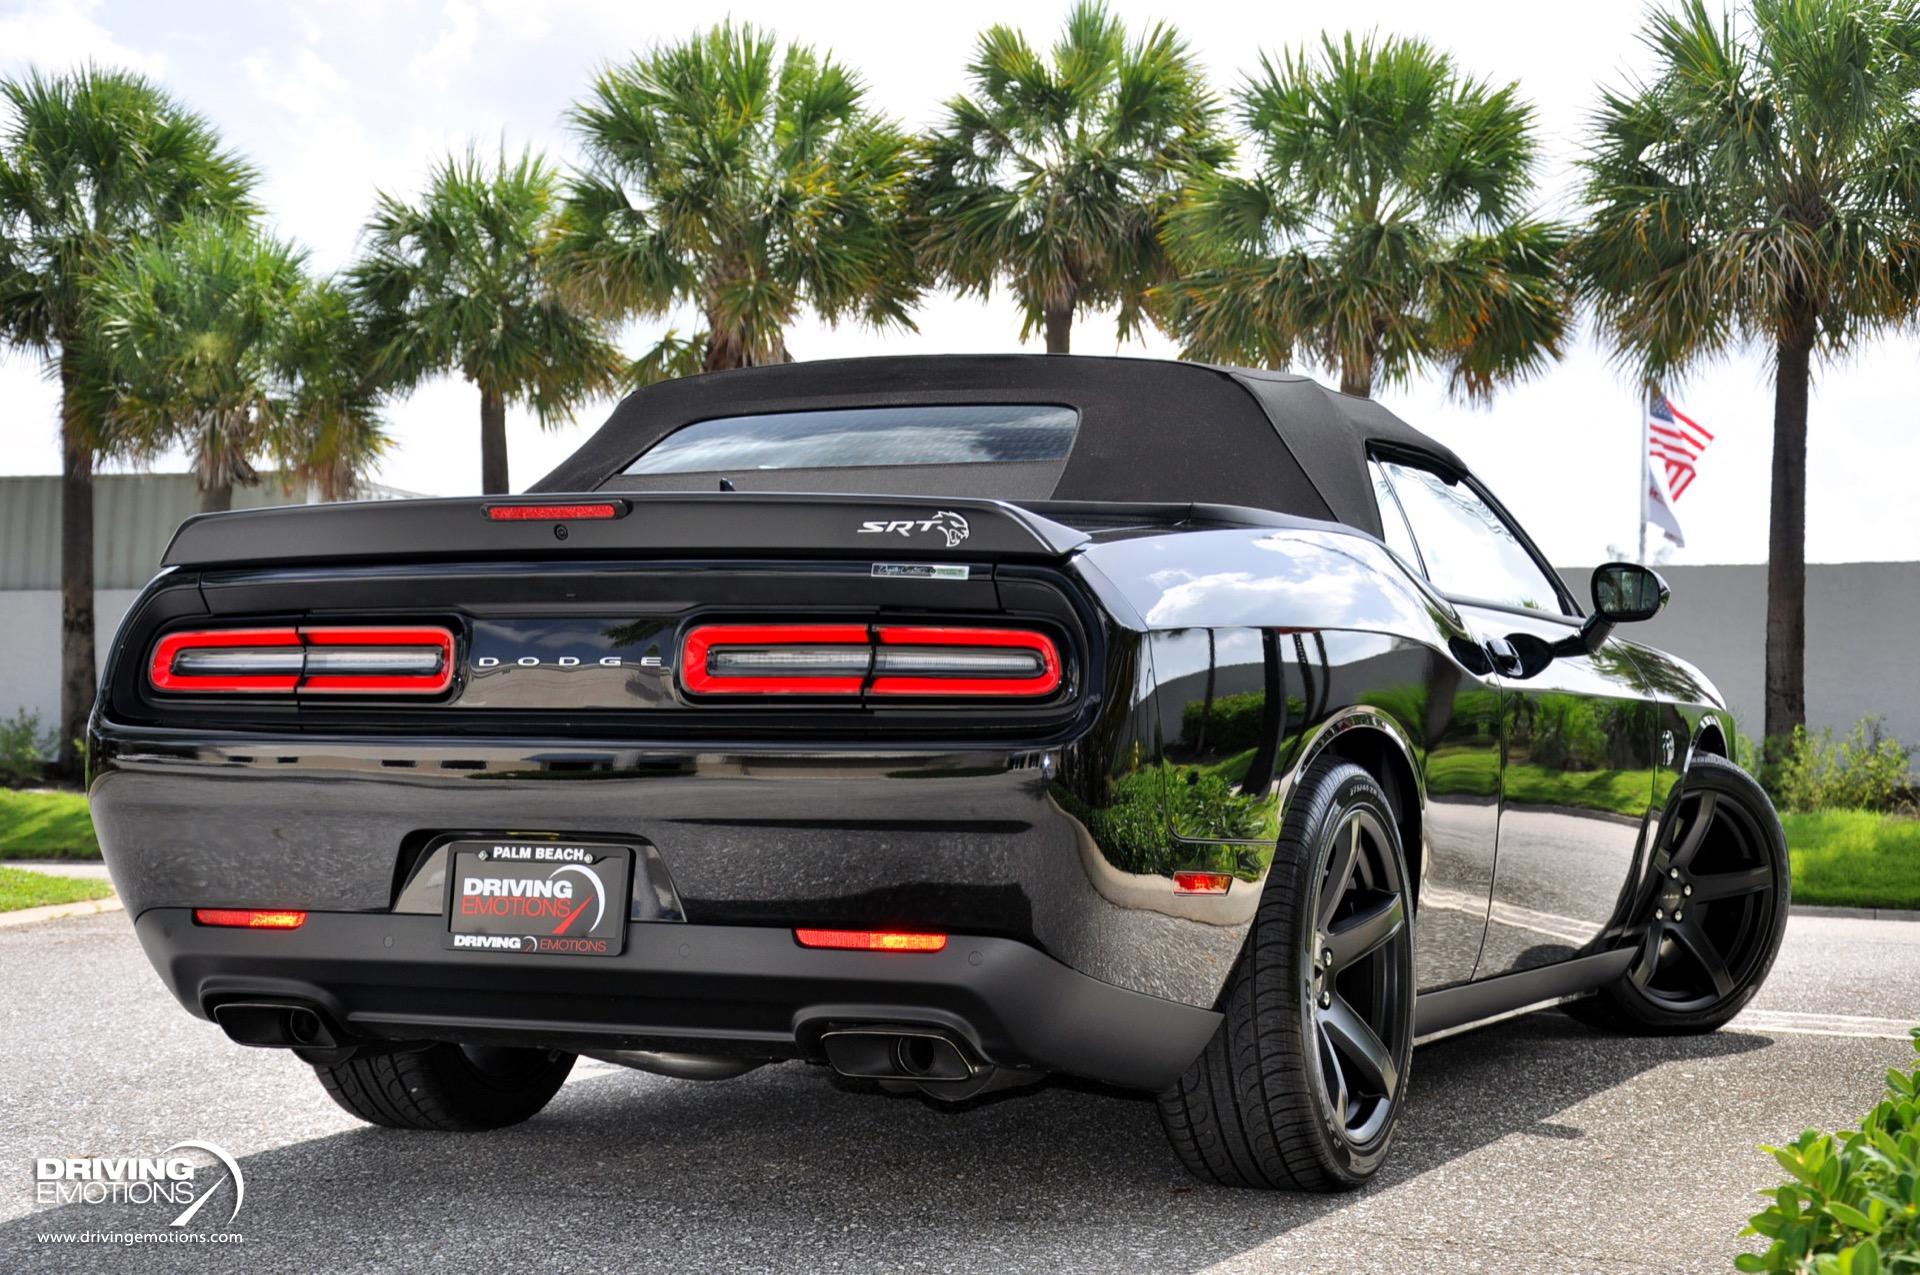 Used 2022 Dodge Challenger SRT Hellcat Convertible by Drop Top Customs! LAGUNA LEATHER! PLUS PACKAGE!  | Lake Park, FL